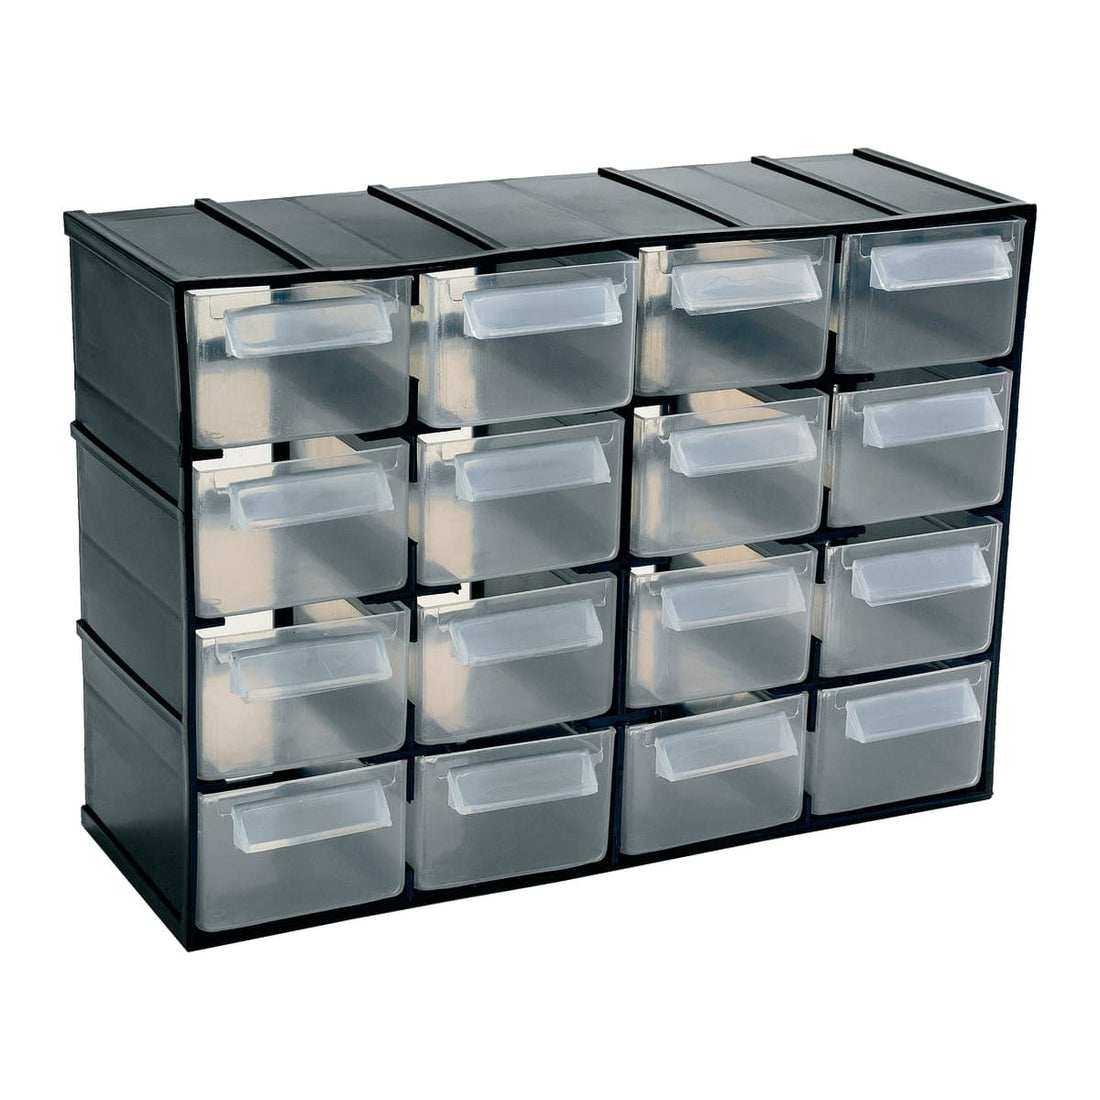 CHEST OF DRAWERS 22,1X8,5X15,6 CM MADE OF TRANSPARENT IMPACT-RESISTANT POLYSTYRENE WITH 16 DRAWERS - best price from Maltashopper.com BR410170041